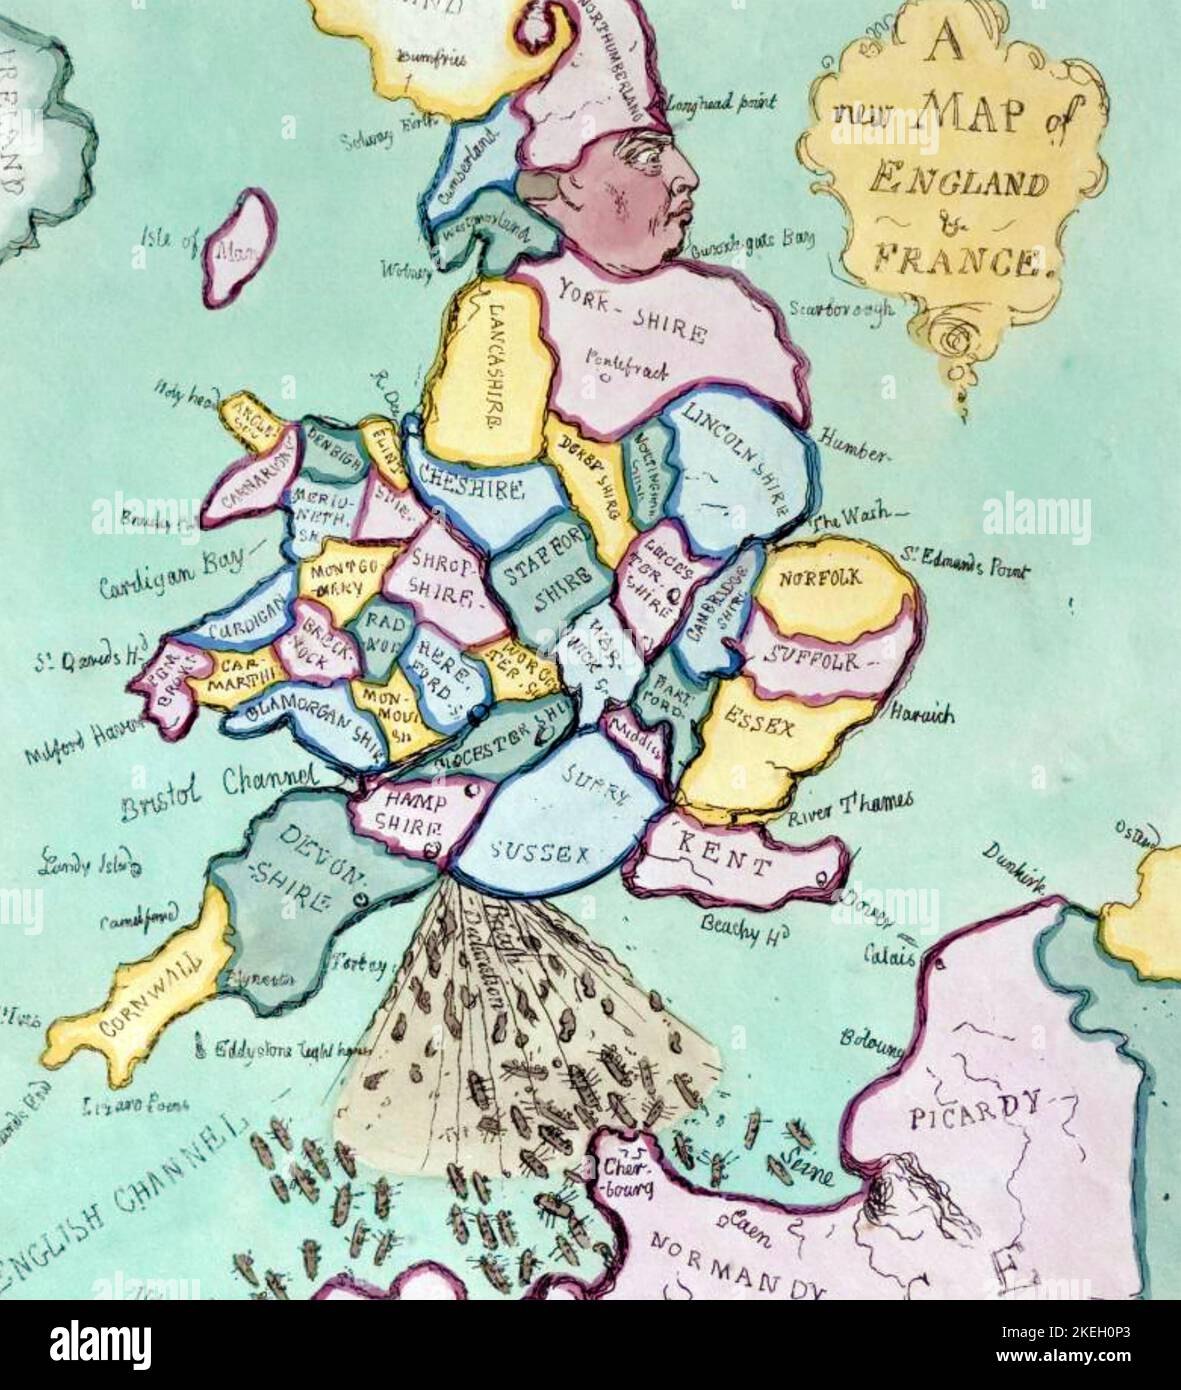 JAMES GILLRAY  (7565-1818) English cartoonist. 'A New Map of England & France - The French Invasion or John Bull bombarding the Bum-Boats' - detail. Stock Photo